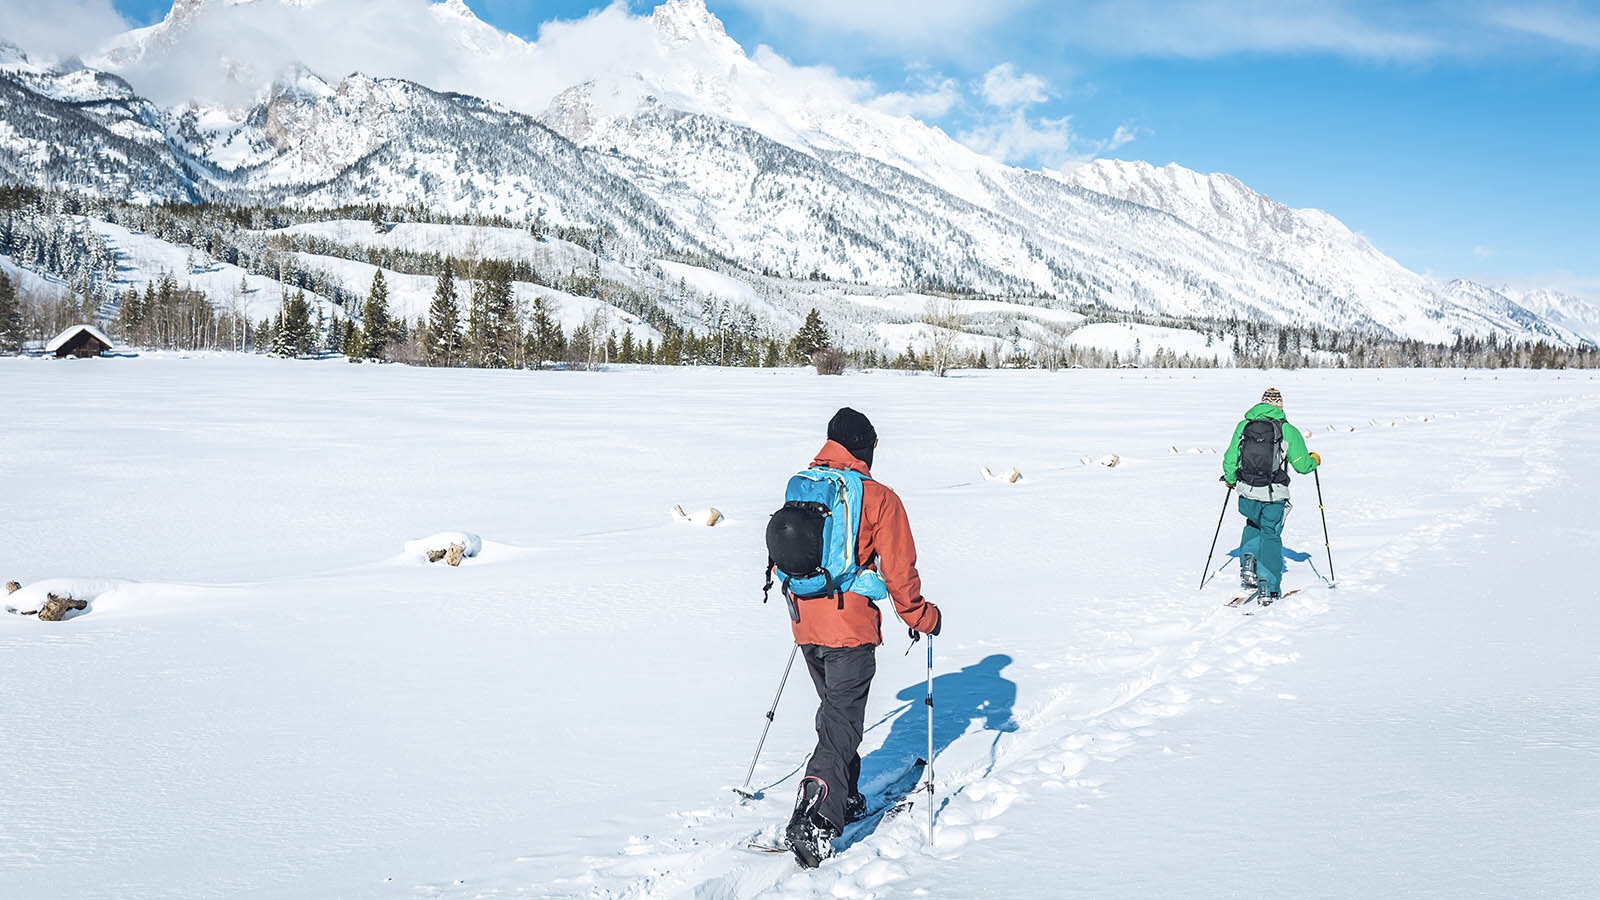 A pair of cross-country skiers enjoy a day near the base of the Grand Tetons in northwest Wyoming.